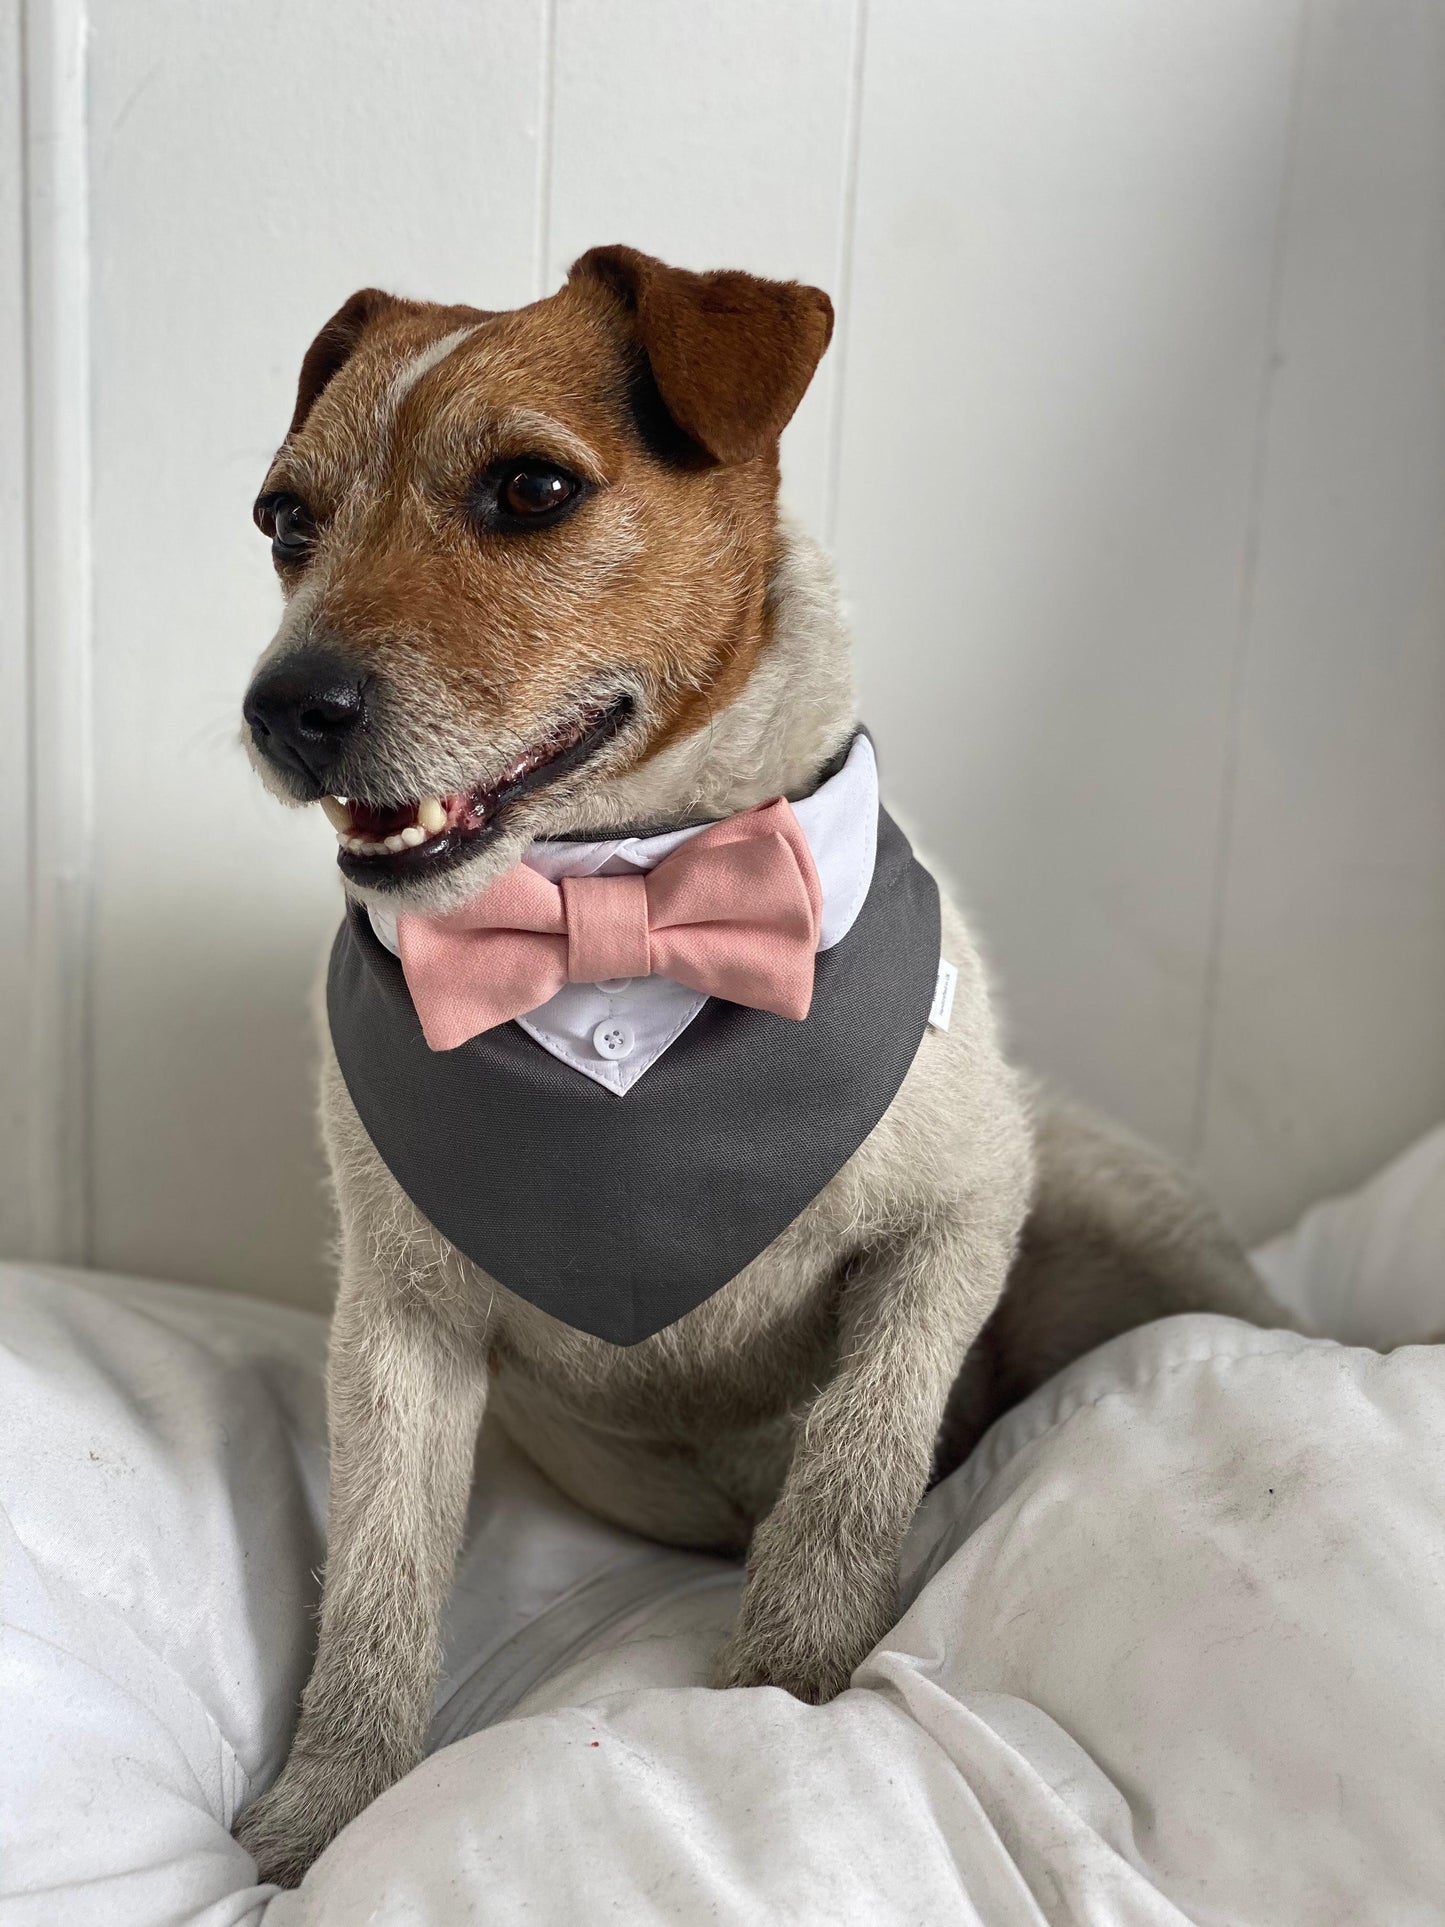 jack russel wearing a grey dog tuxedo with pink bow tie